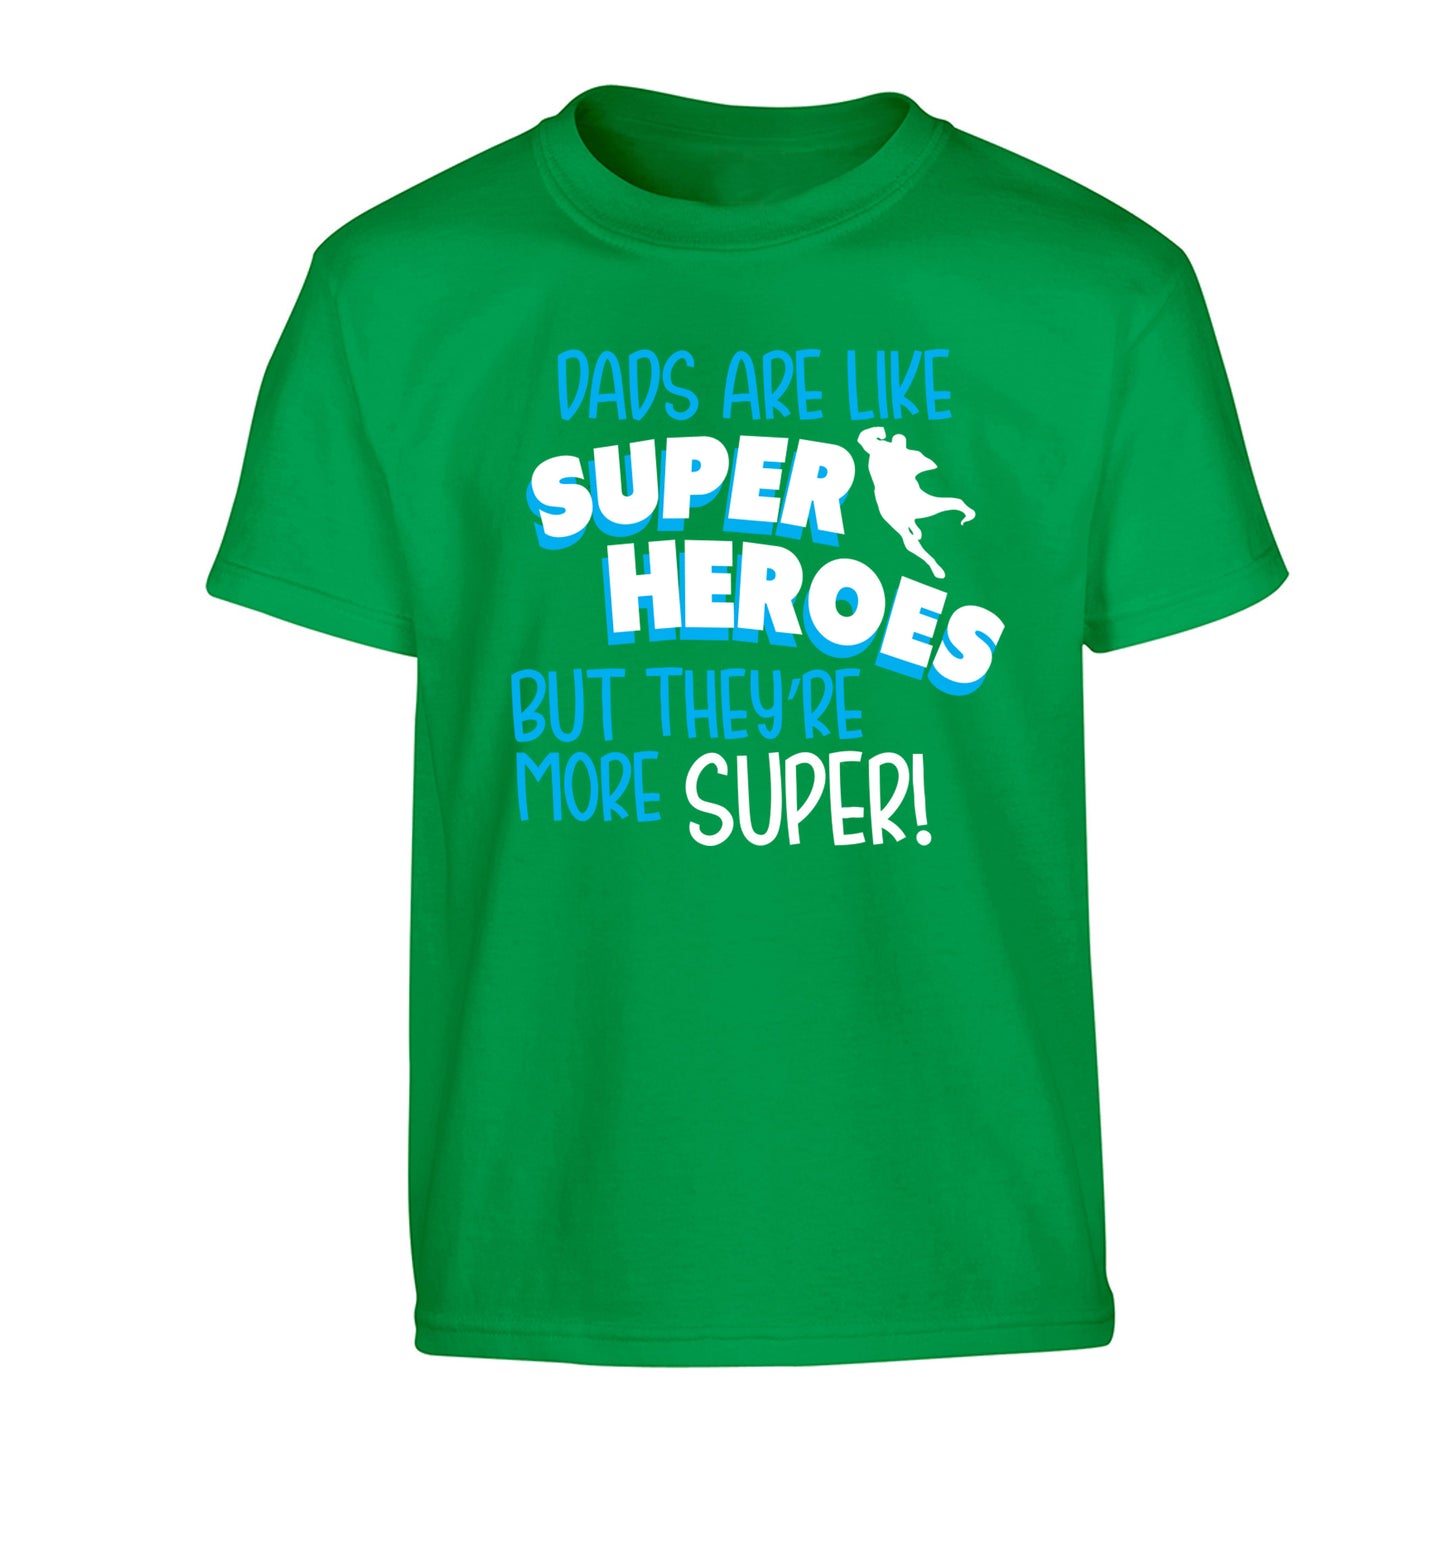 Dads are like superheros but they're more super Children's green Tshirt 12-13 Years